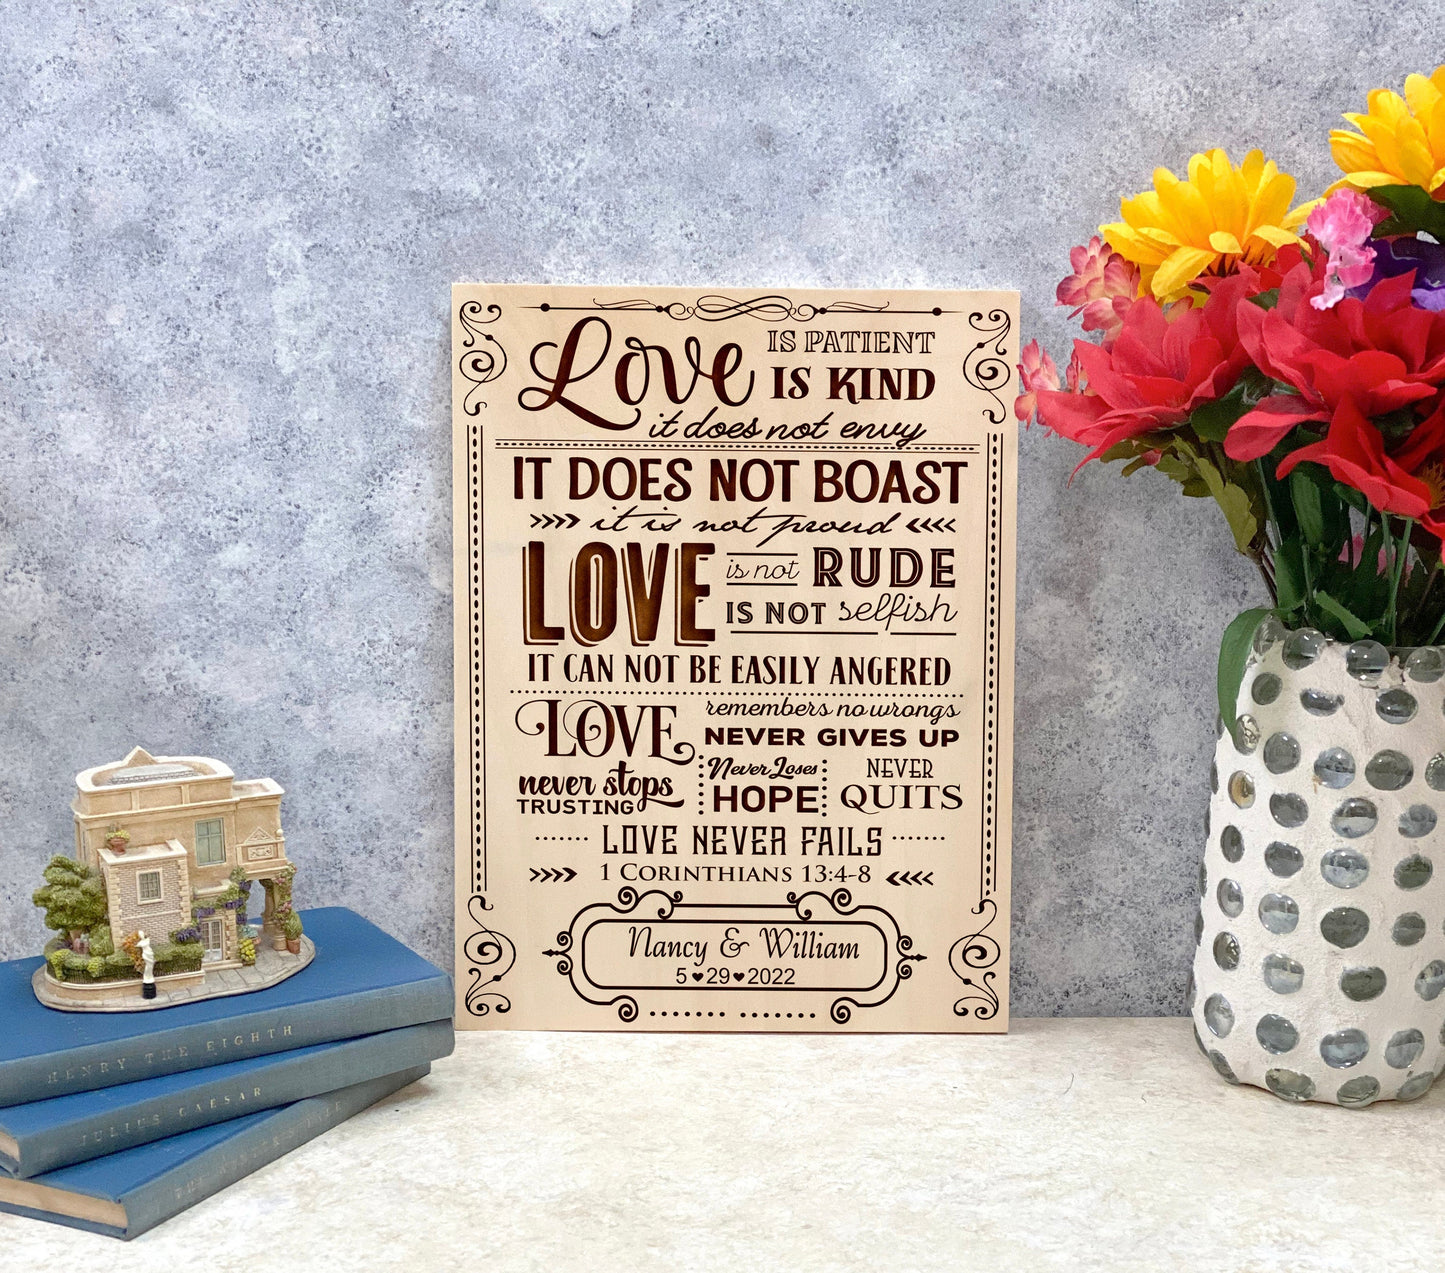 Personalized Engraved Cradled Wood Love is Patient Corinthians 13 Prayer, Love is Kind, Wedding Gift, Engagement Gift, Anniversary Gift, Engraved Prayer